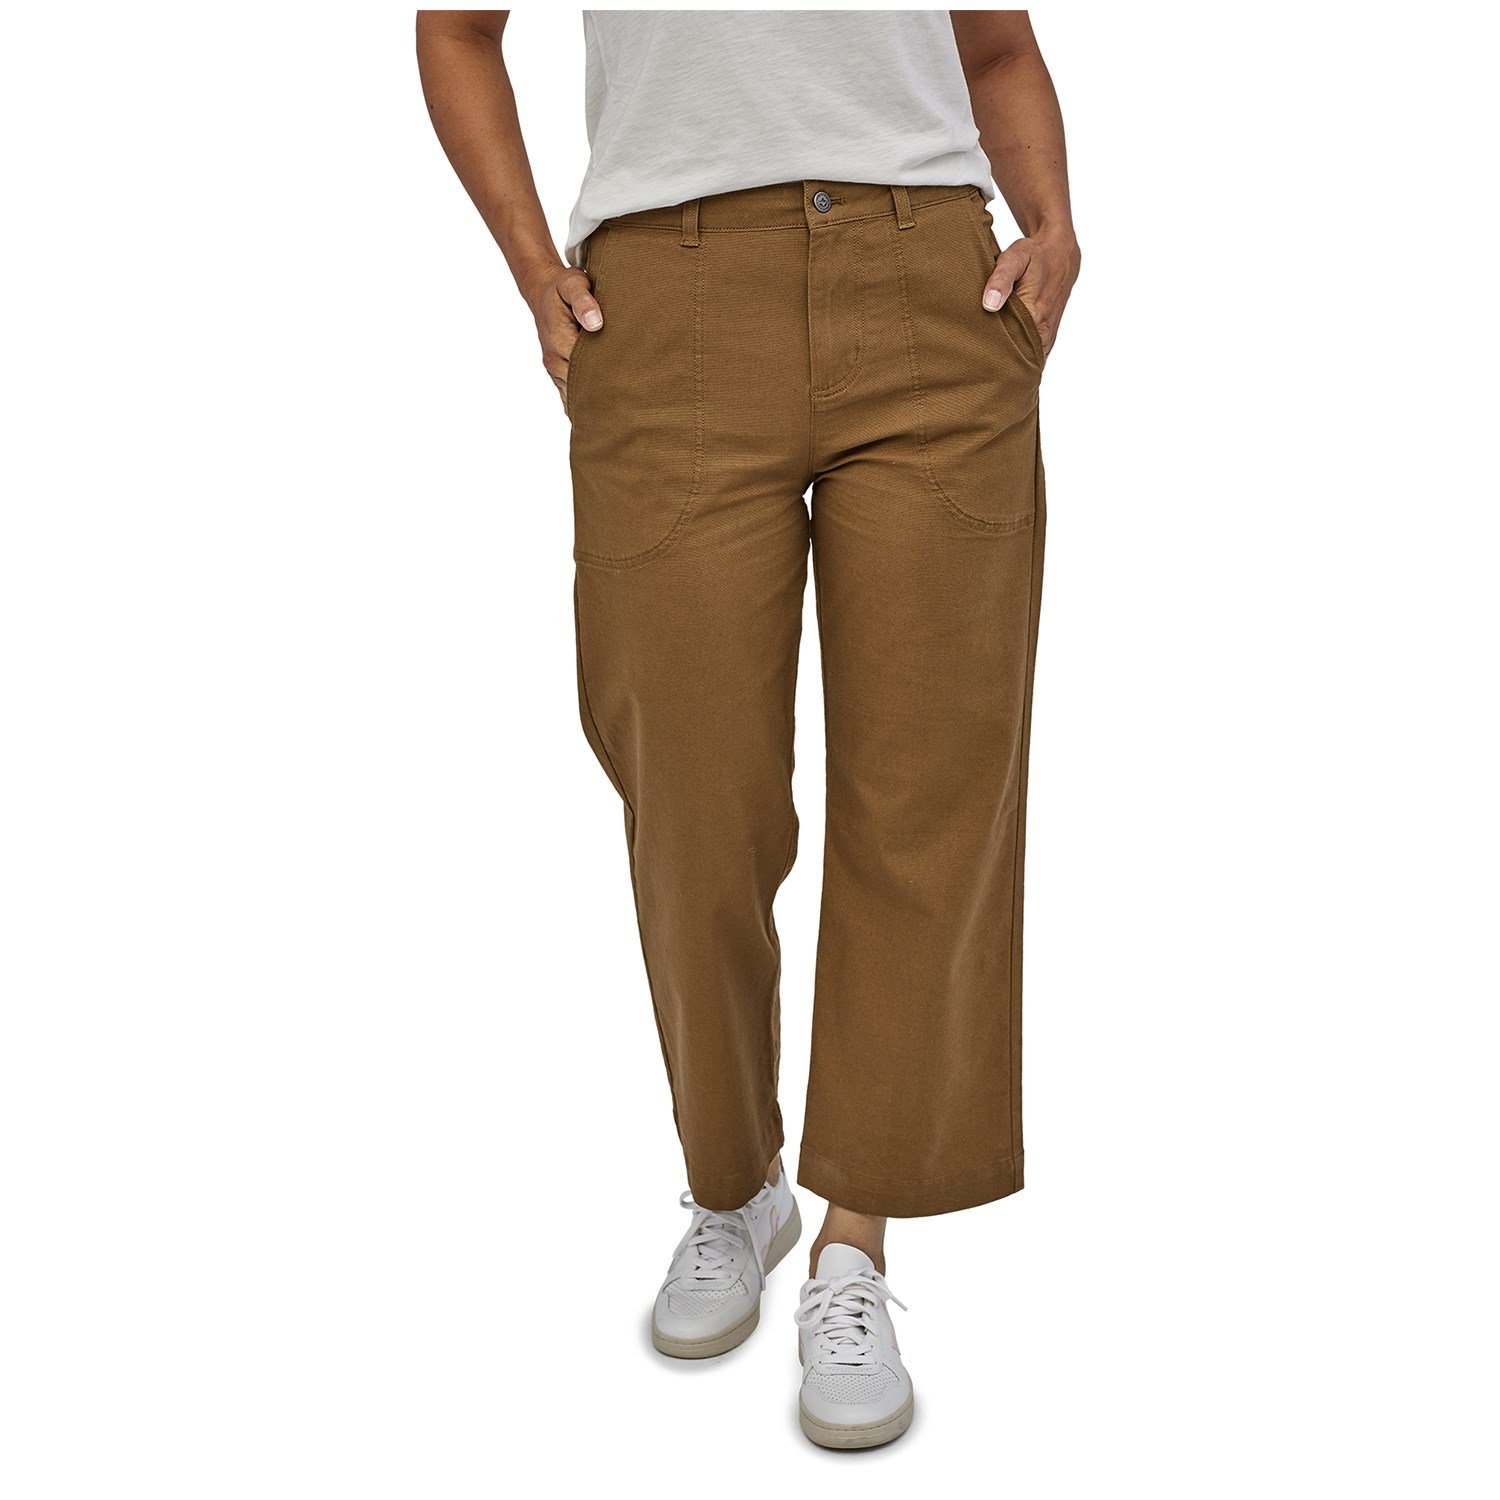 Patagonia Double Knee Canvas Stand Up Pants